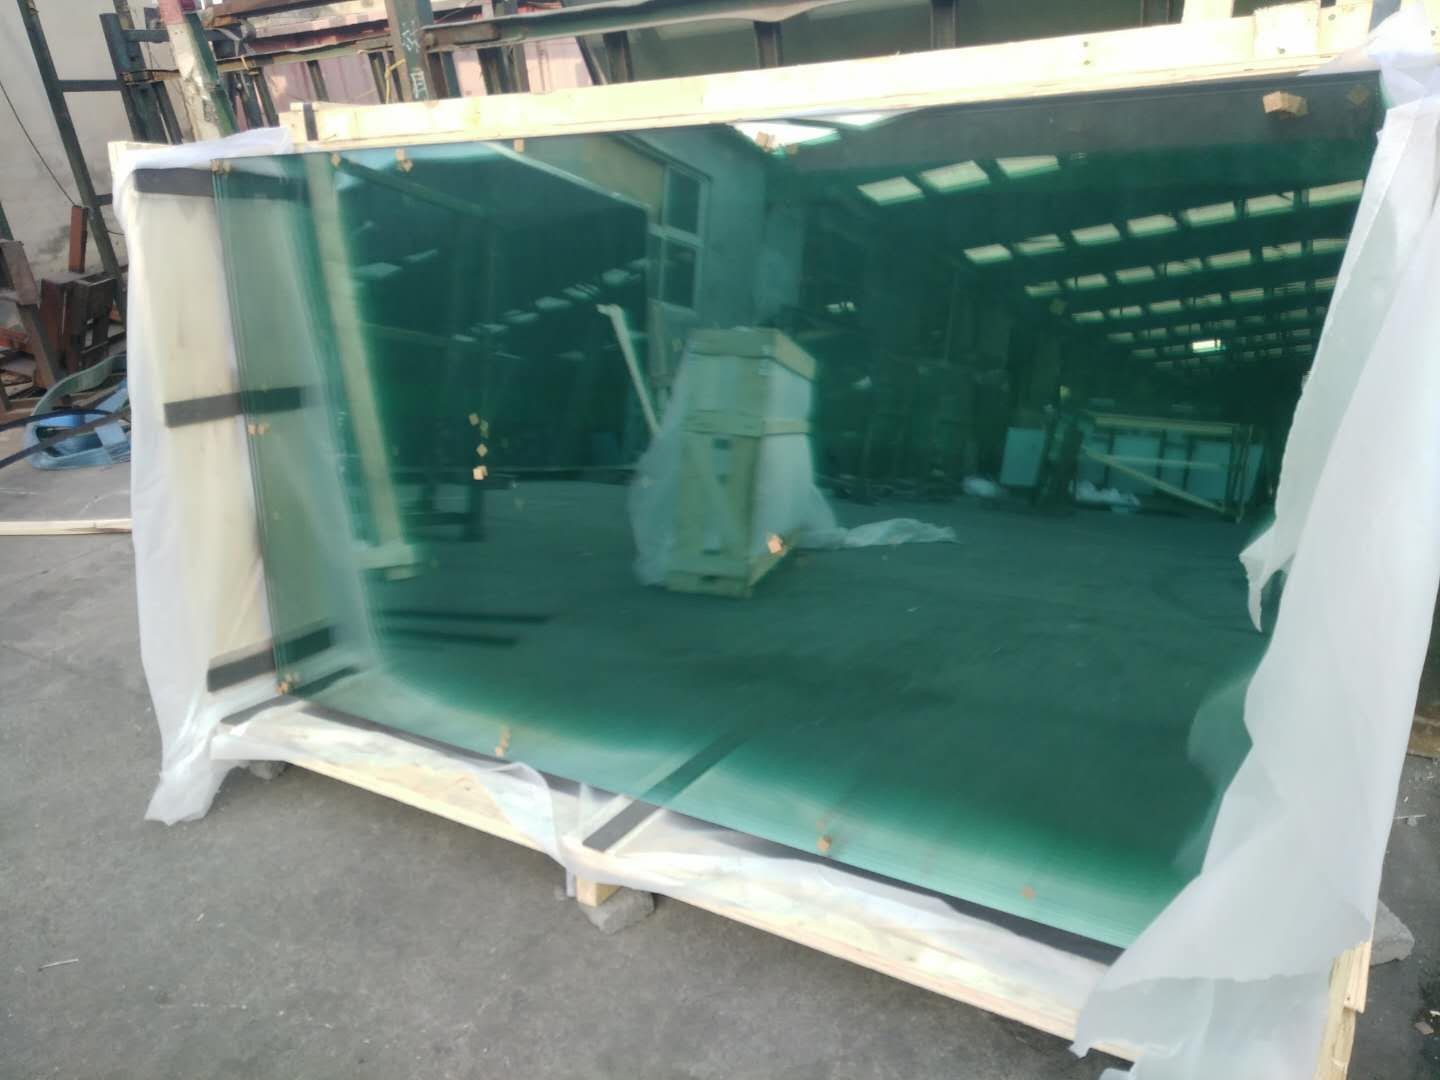 15mm SHOP FRONT GLASS, GUIDE,BALUSTRADE, TEMPERED GLASS SHOW CASE, 15mm, 12mm, 19mm, 1830*2440 mm, SWIMMING POOL FENCES